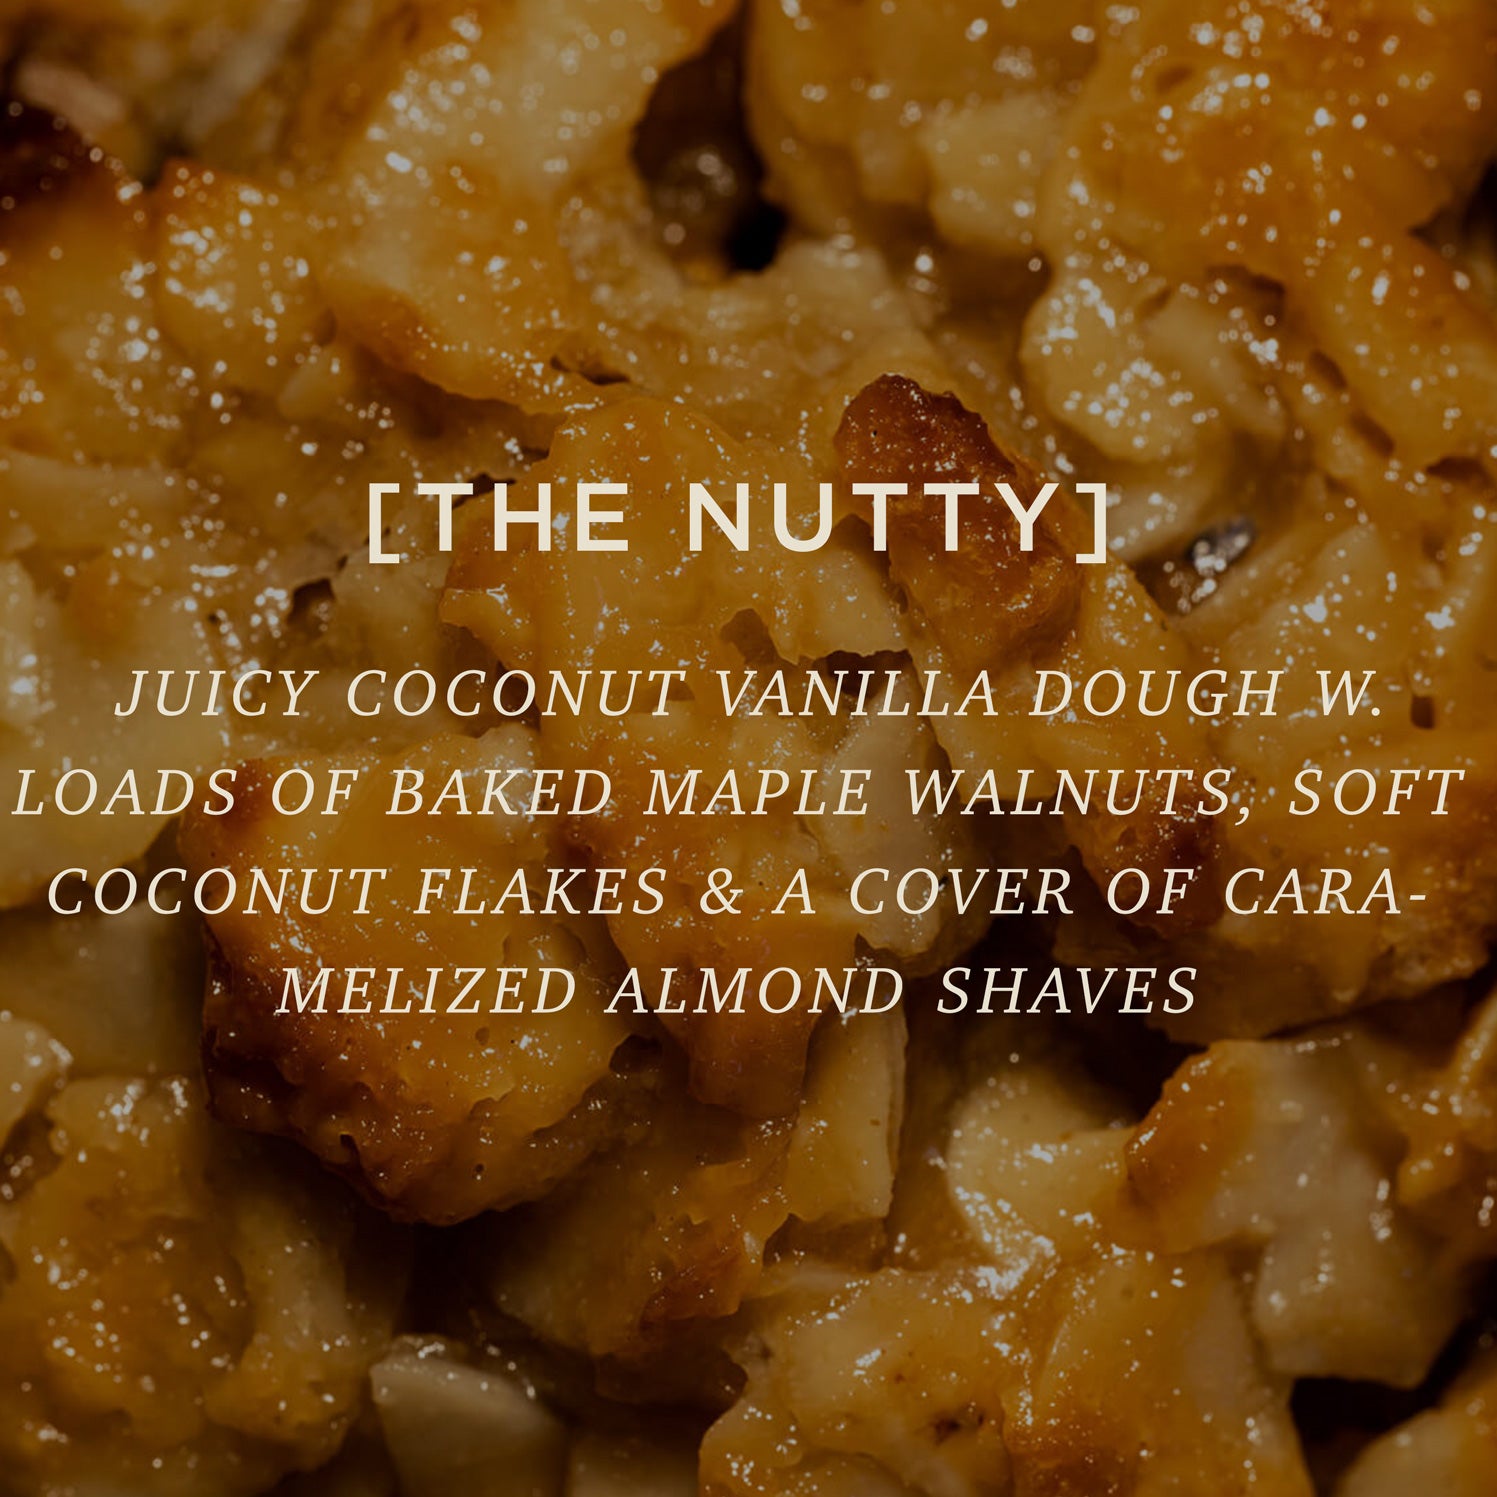 THE NUTTY